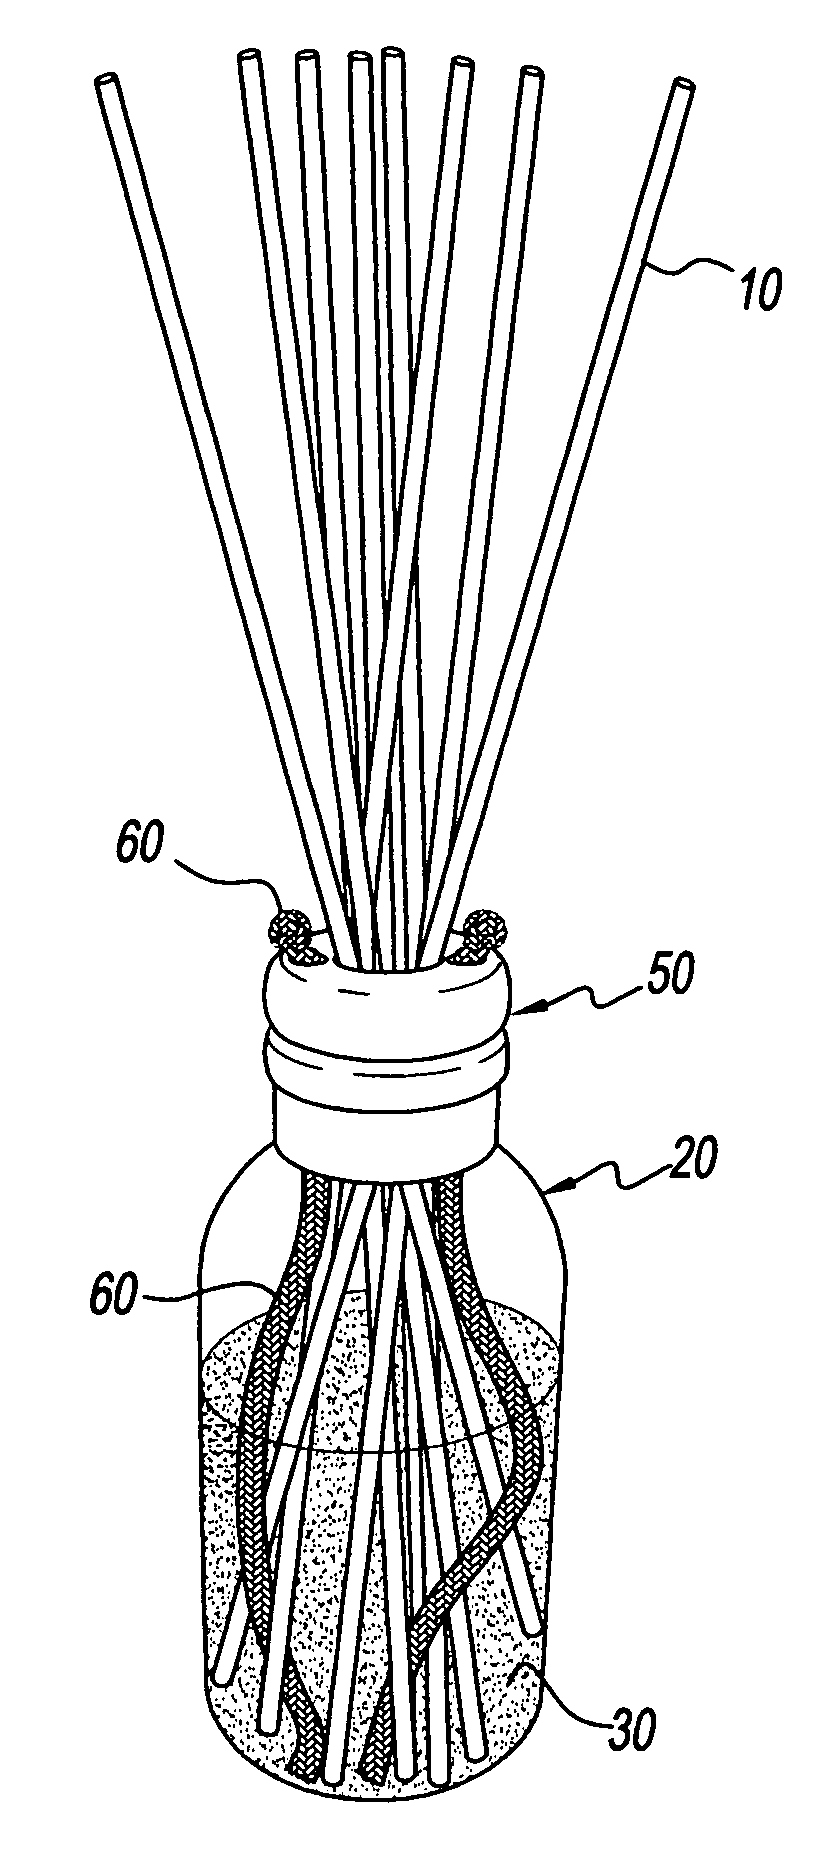 Fragrance diffuser using multiple thin artificial wicks